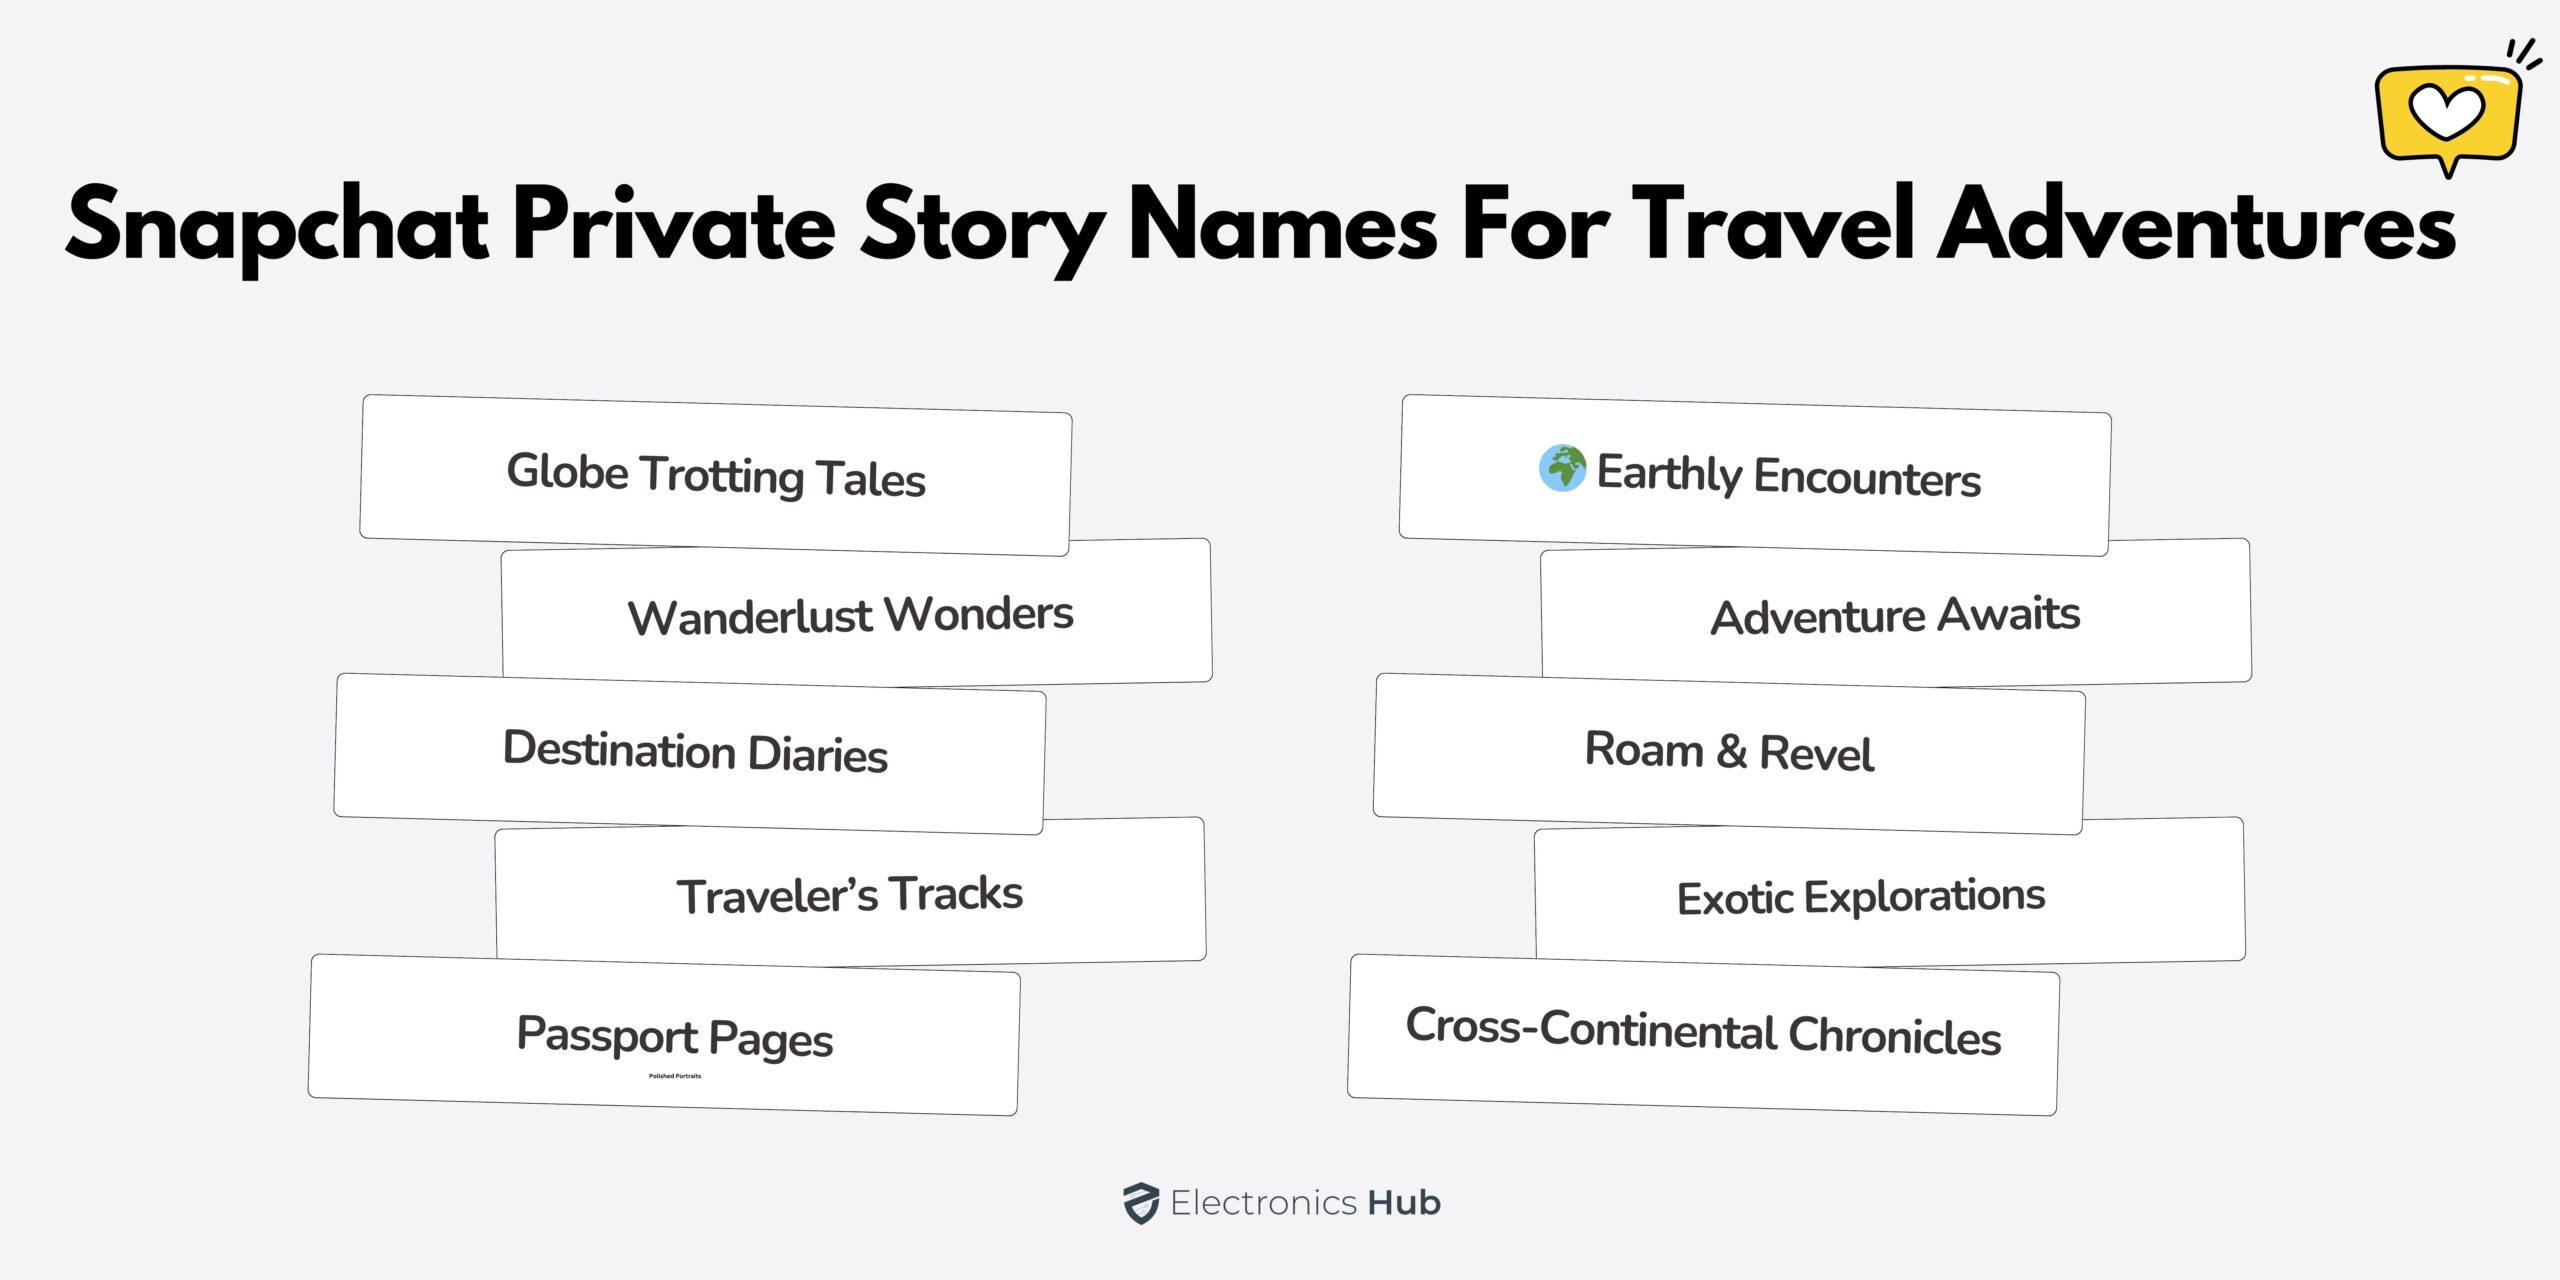 Snapchat Private Story Names for Travel Adventures